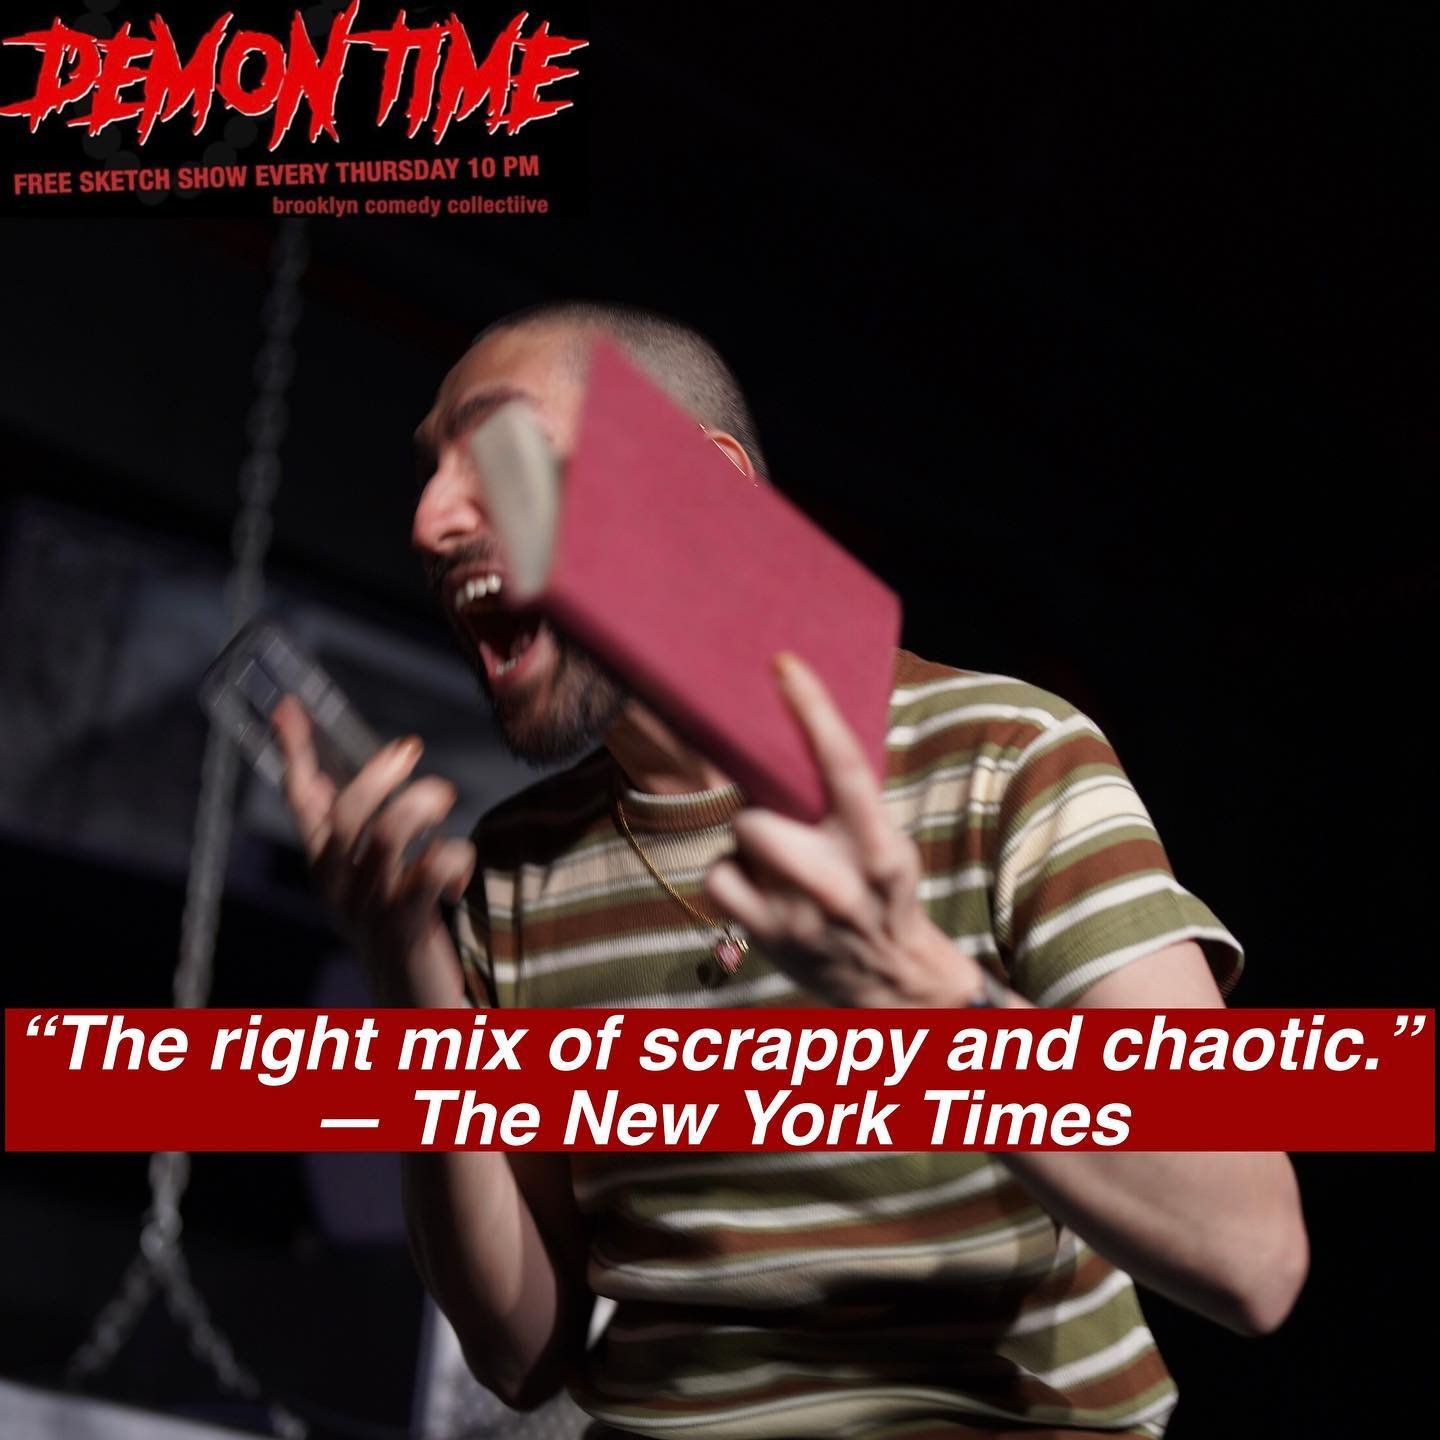 The New York Times gave BCCs Demon time a little visit the other week. Come and check out this leading house of improvisation Tuesday-Sunday and demon time every Thursday at 10pm 😈 for FREE ❤️&zwj;🔥

Love all our most scrappy and chaotic players 🔥